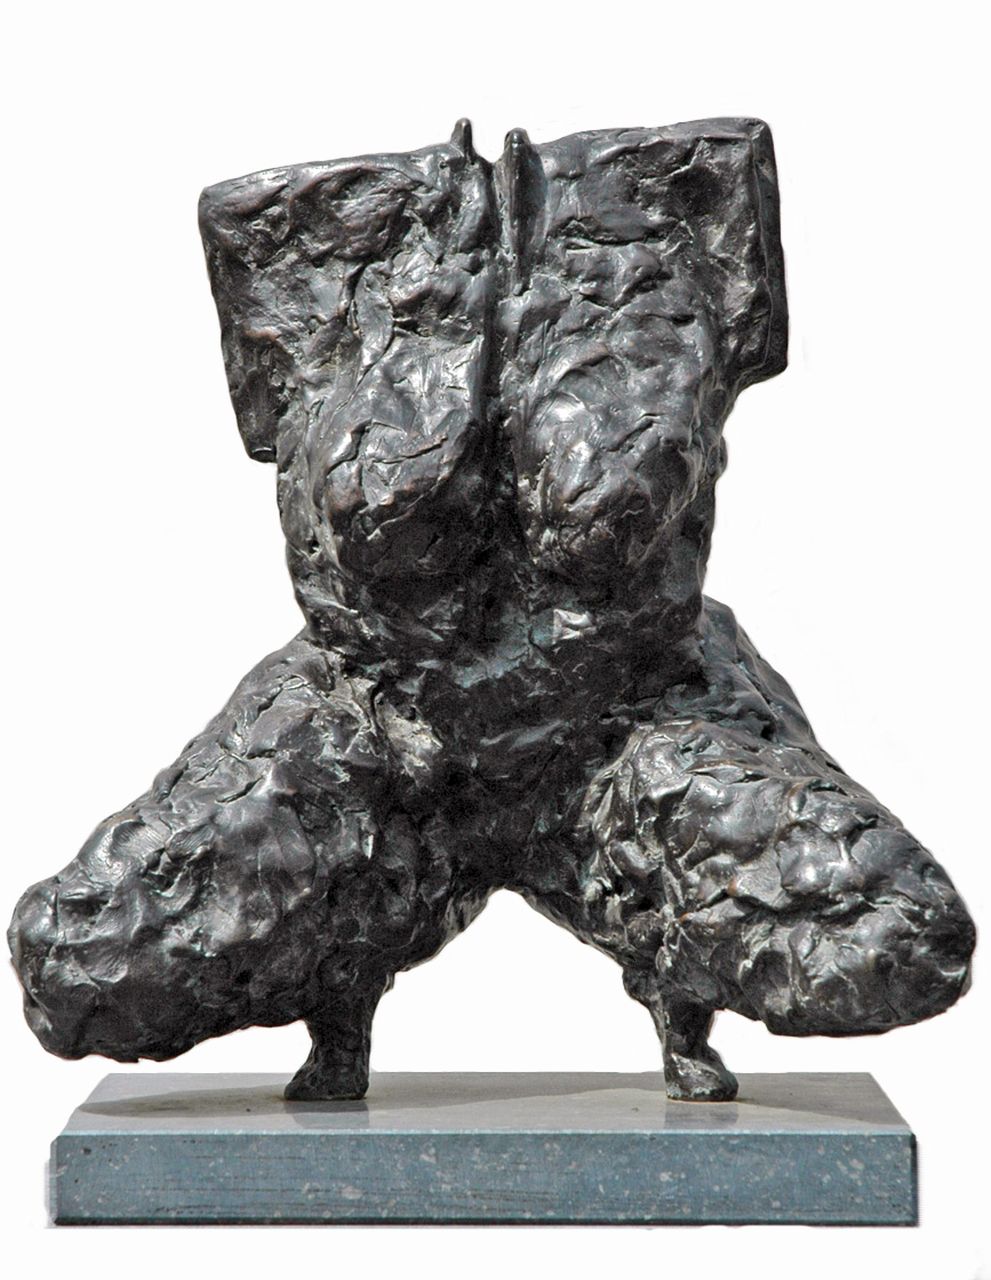 LeRoy A.  | Antoinette LeRoy, Innana, bronze 30.3 x 25.8 cm, signed with initials on right side of bottom